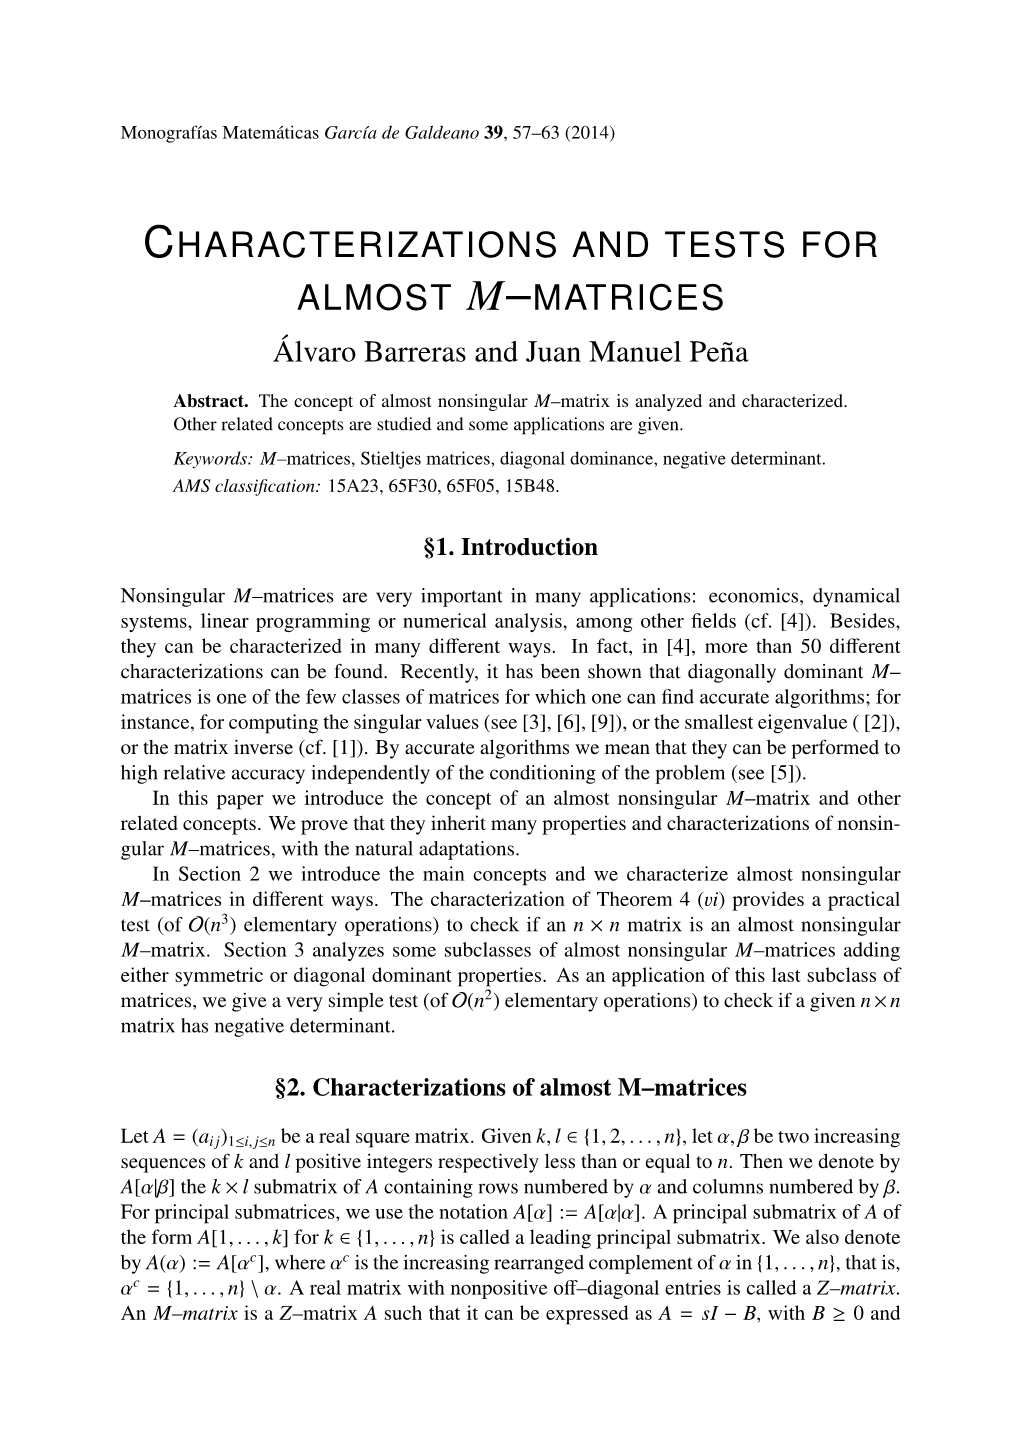 Characterizations and Tests for Almost M–Matrices 59